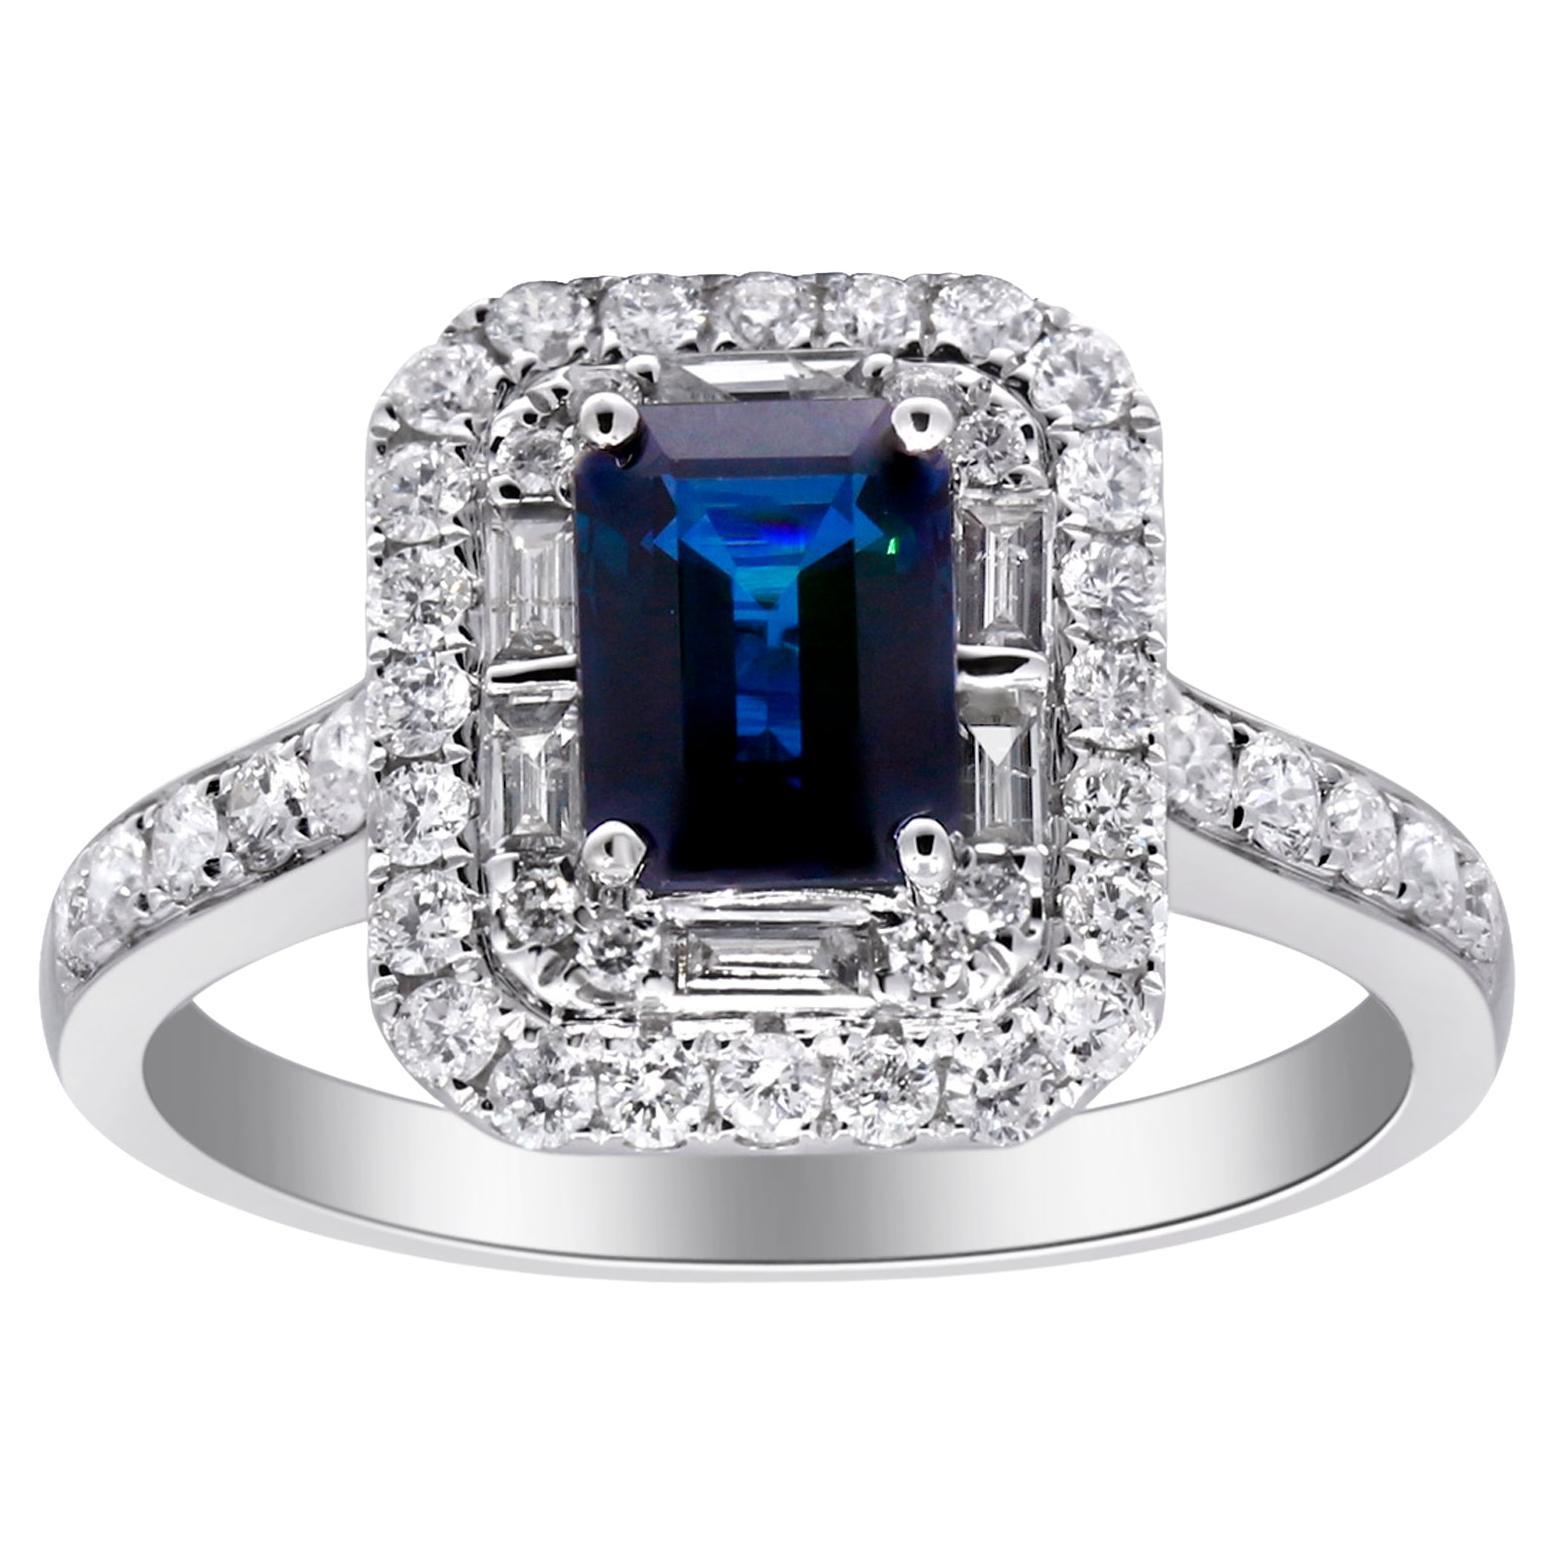 1.18 Carat Emerald-Cut Blue Sapphire with Diamond Accents 10K White Gold Ring For Sale